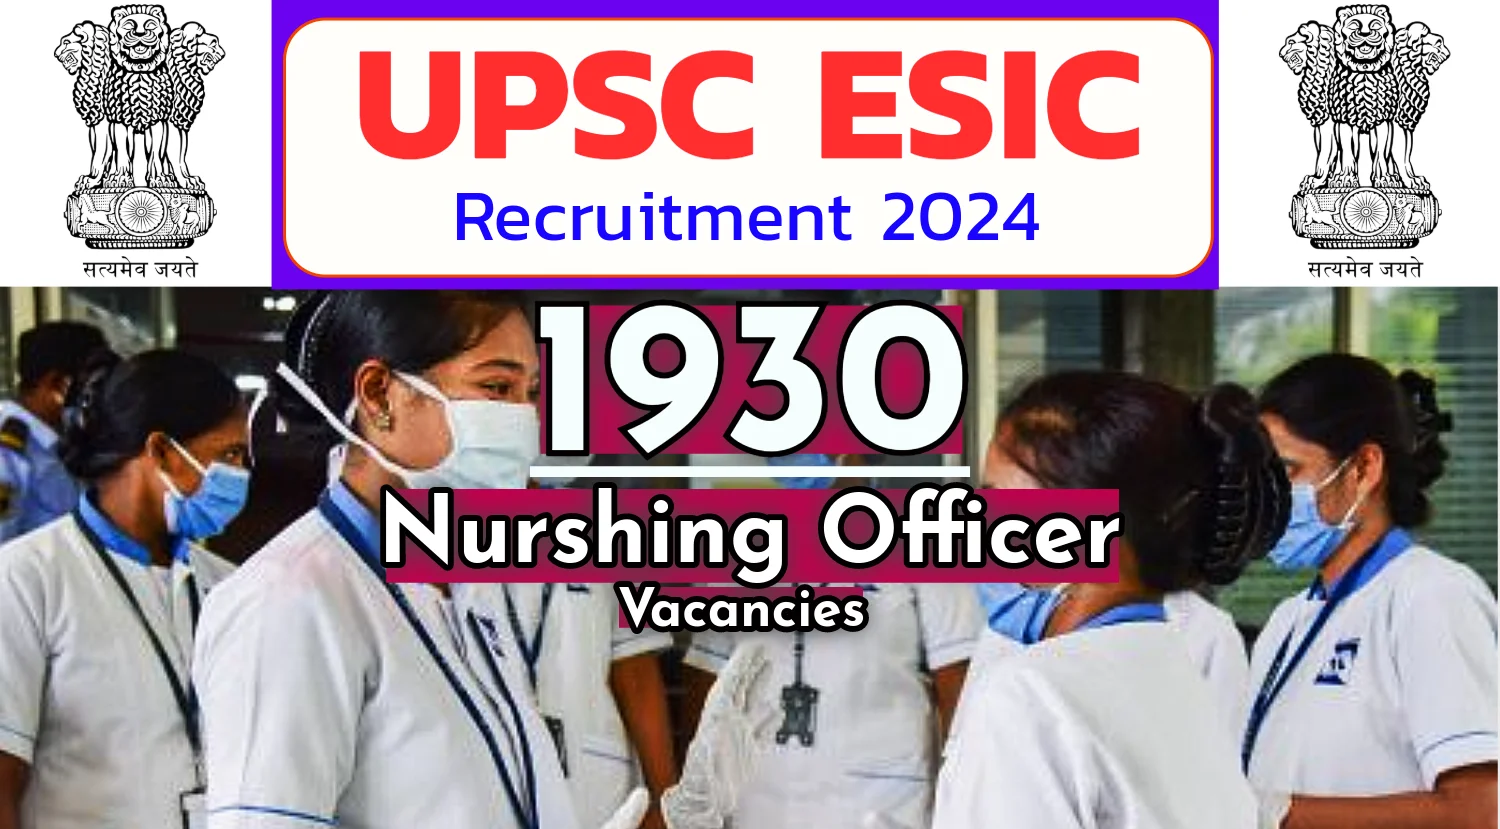 UPSC ESIC Nursing Officer Recruitment Notification for 1930 Vacancies Out, Check Eligibility, Selection and Application Process Now – Karmasandhan